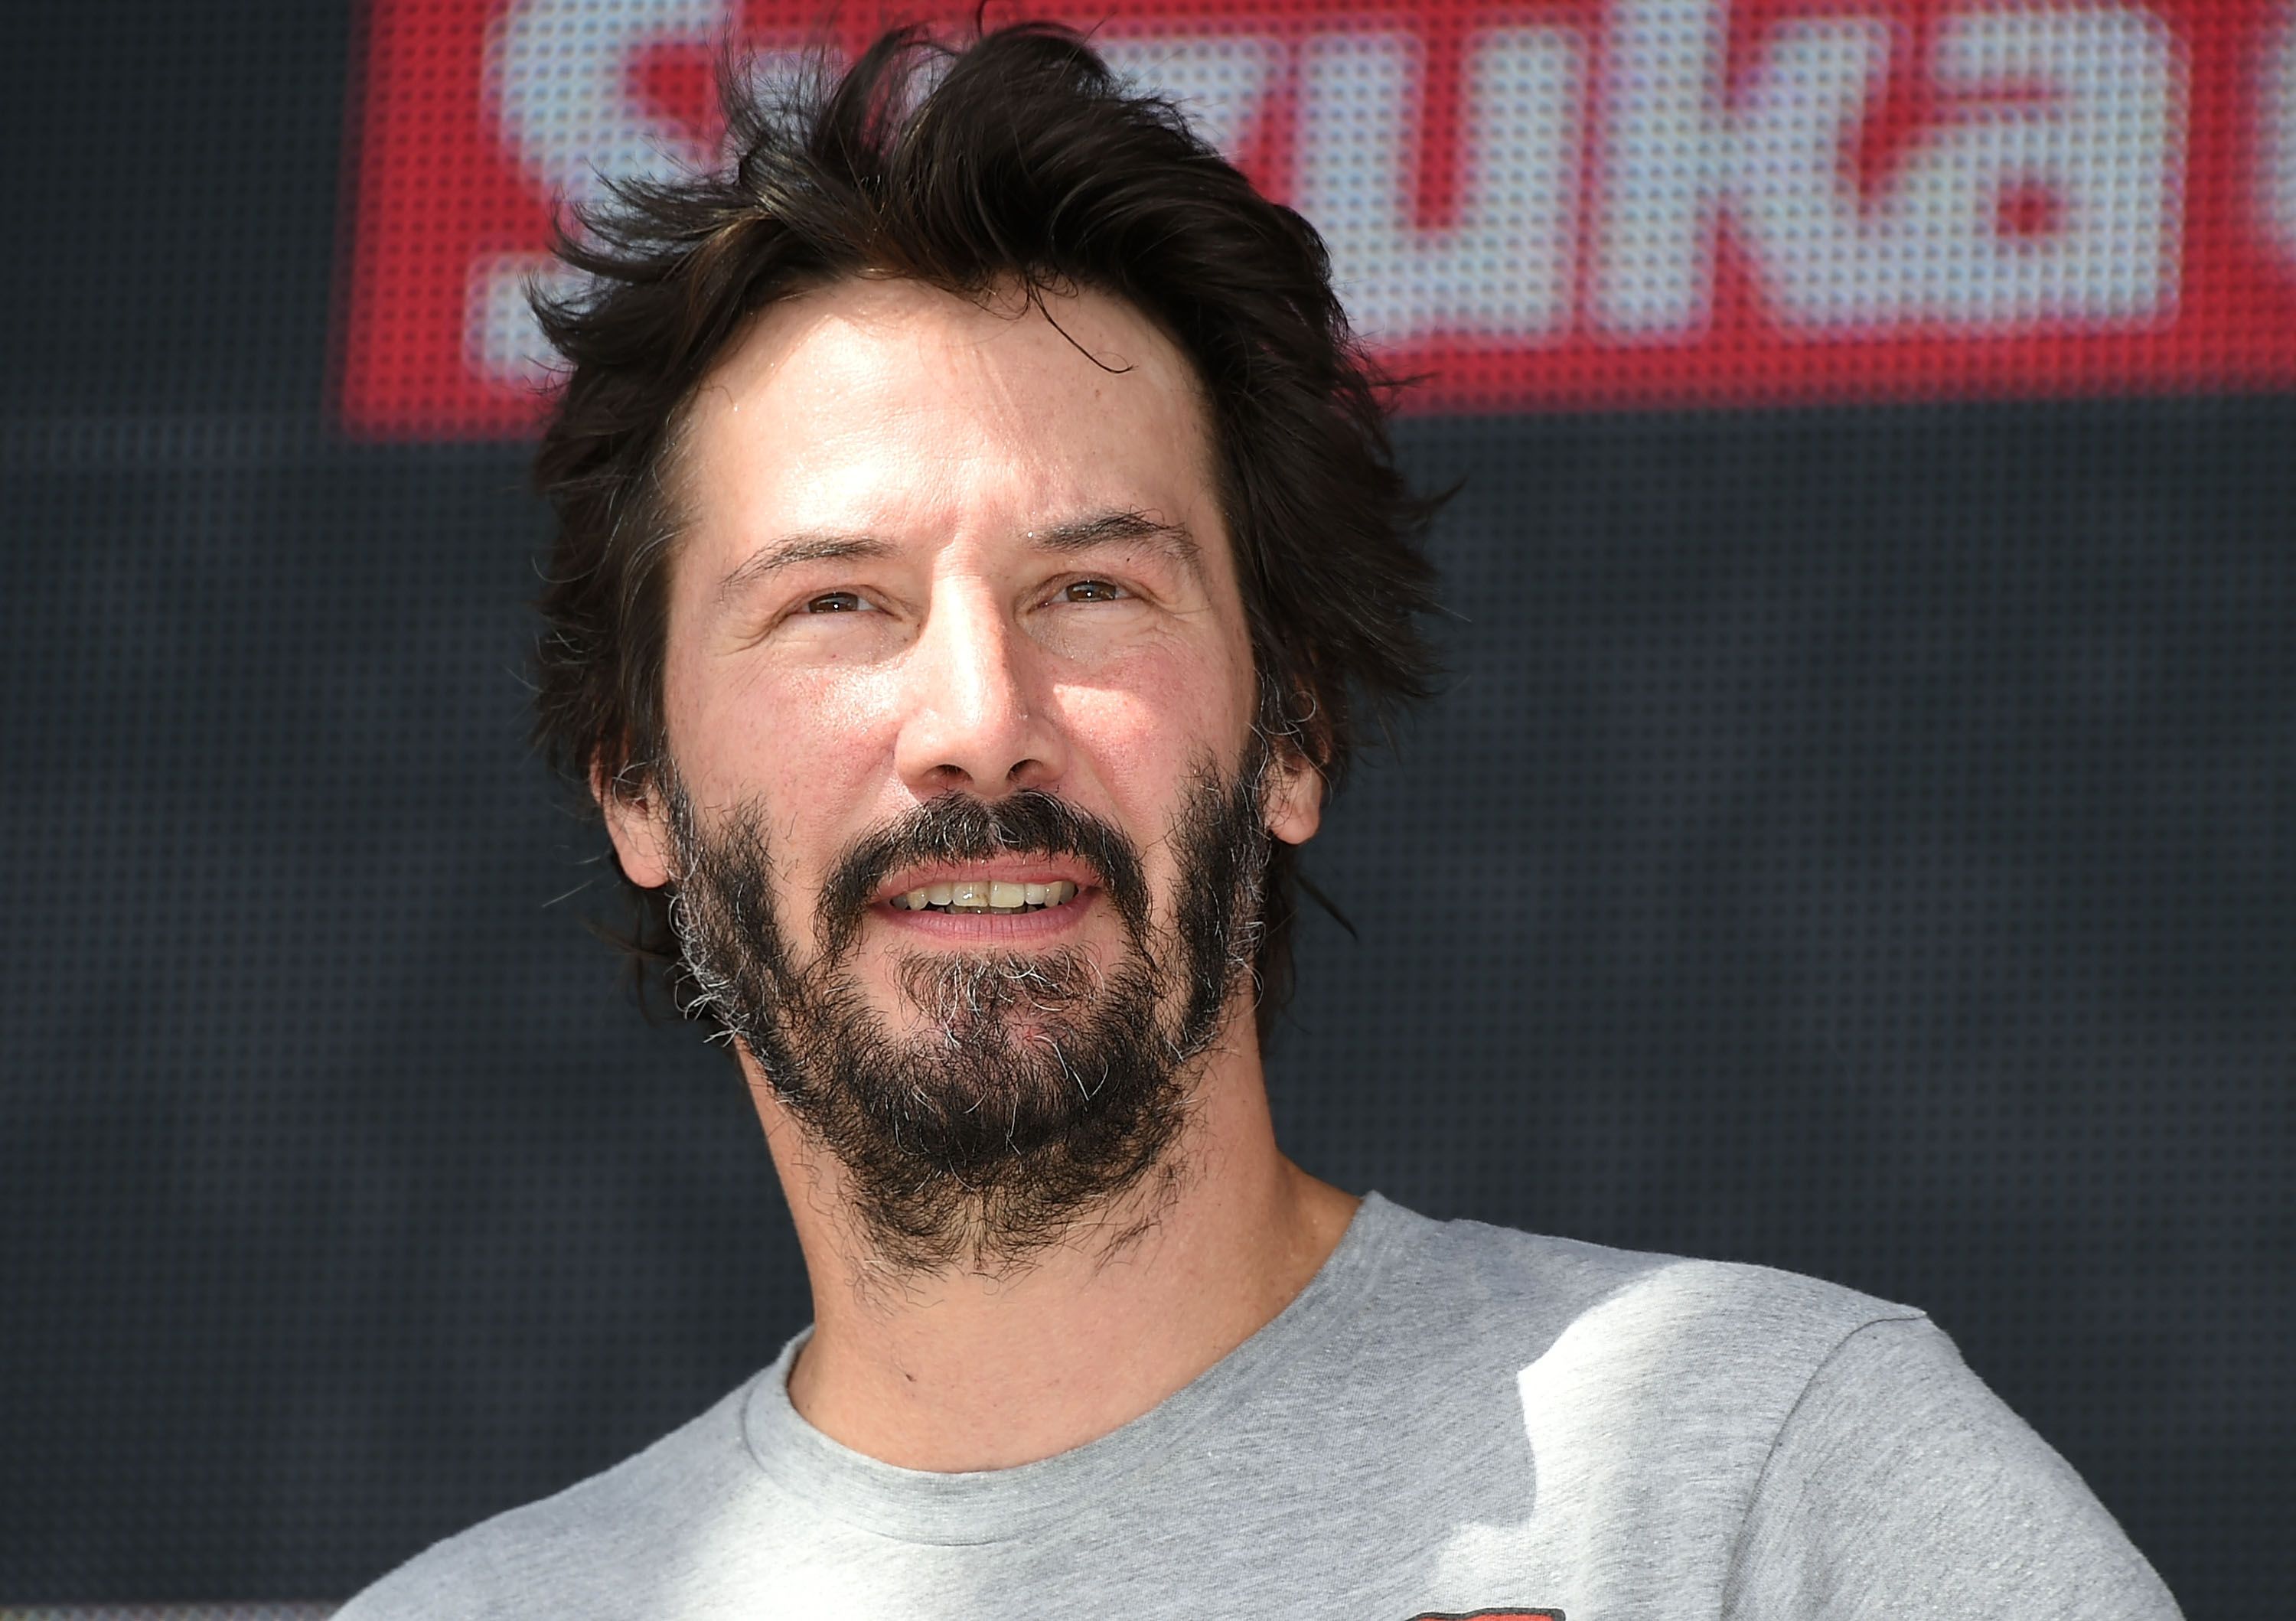 Keanu Reeves during the talk session during the Suzuka 8 Hours at the Suzuka Circuit on July 26, 2015 in Suzuka, Japan. | Source: Getty Images